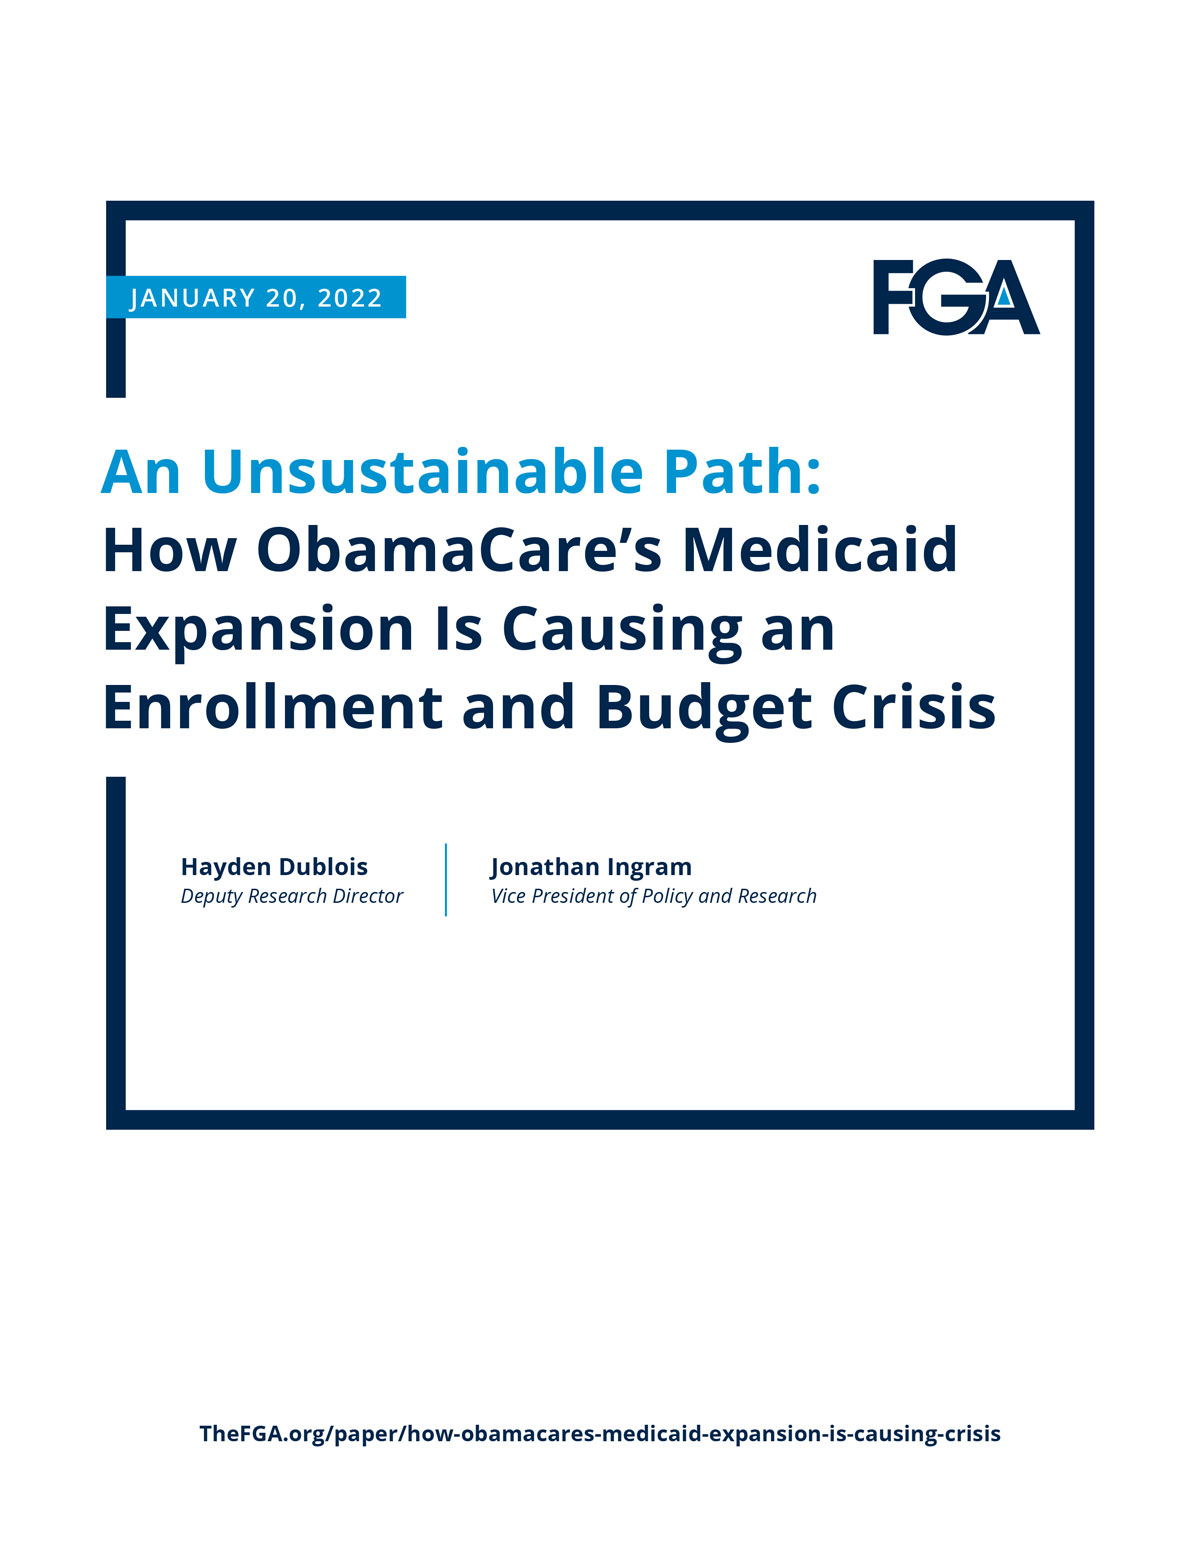 An Unsustainable Path: How ObamaCare’s Medicaid Expansion is Causing an Enrollment and Budget Crisis